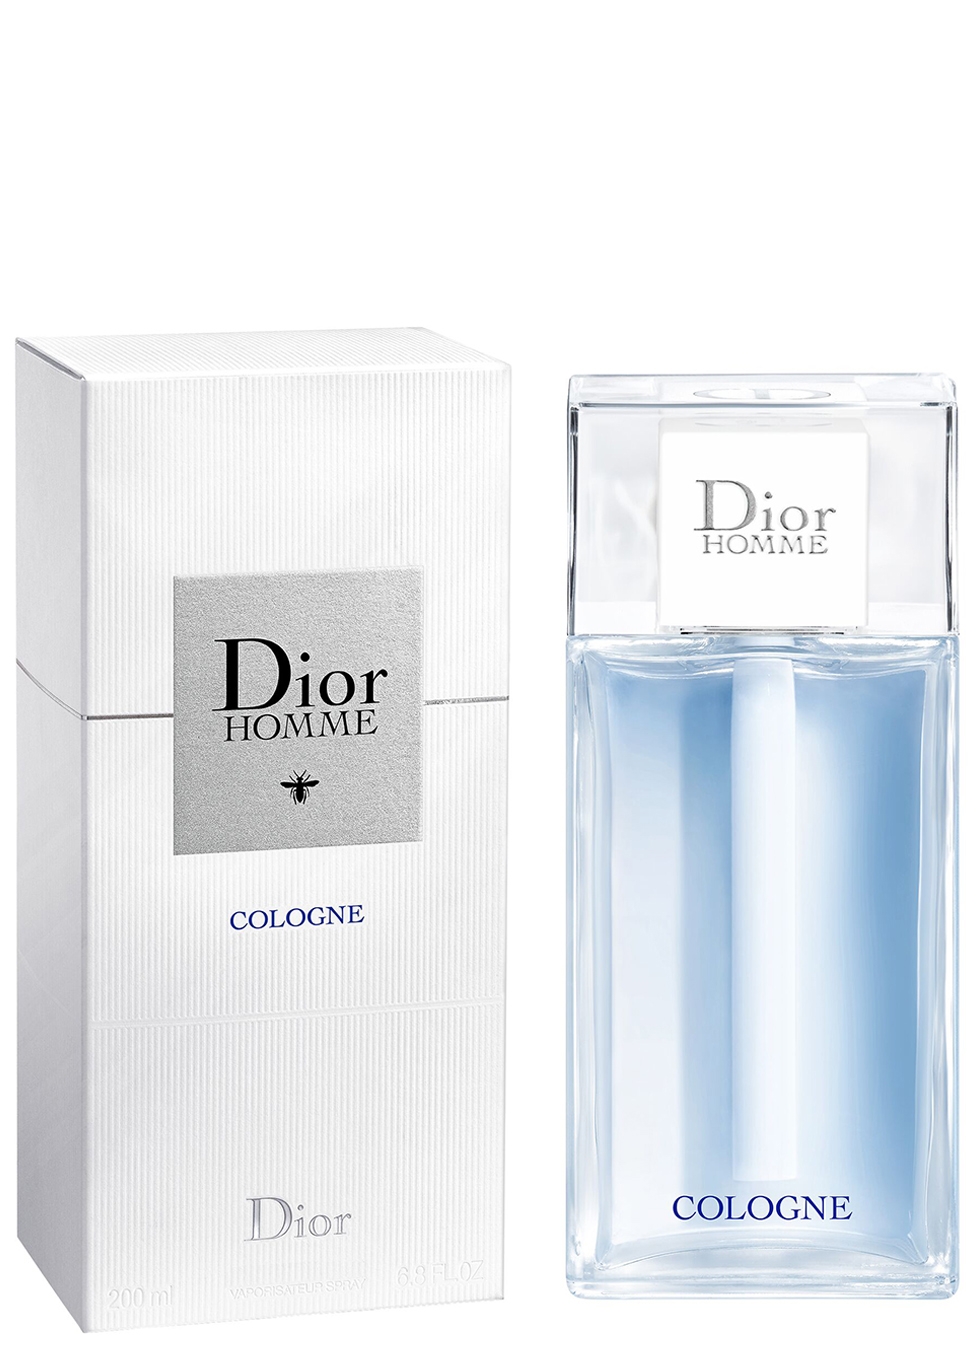 Dior  Homme Cologne  chiết 10ml  Mans Styles